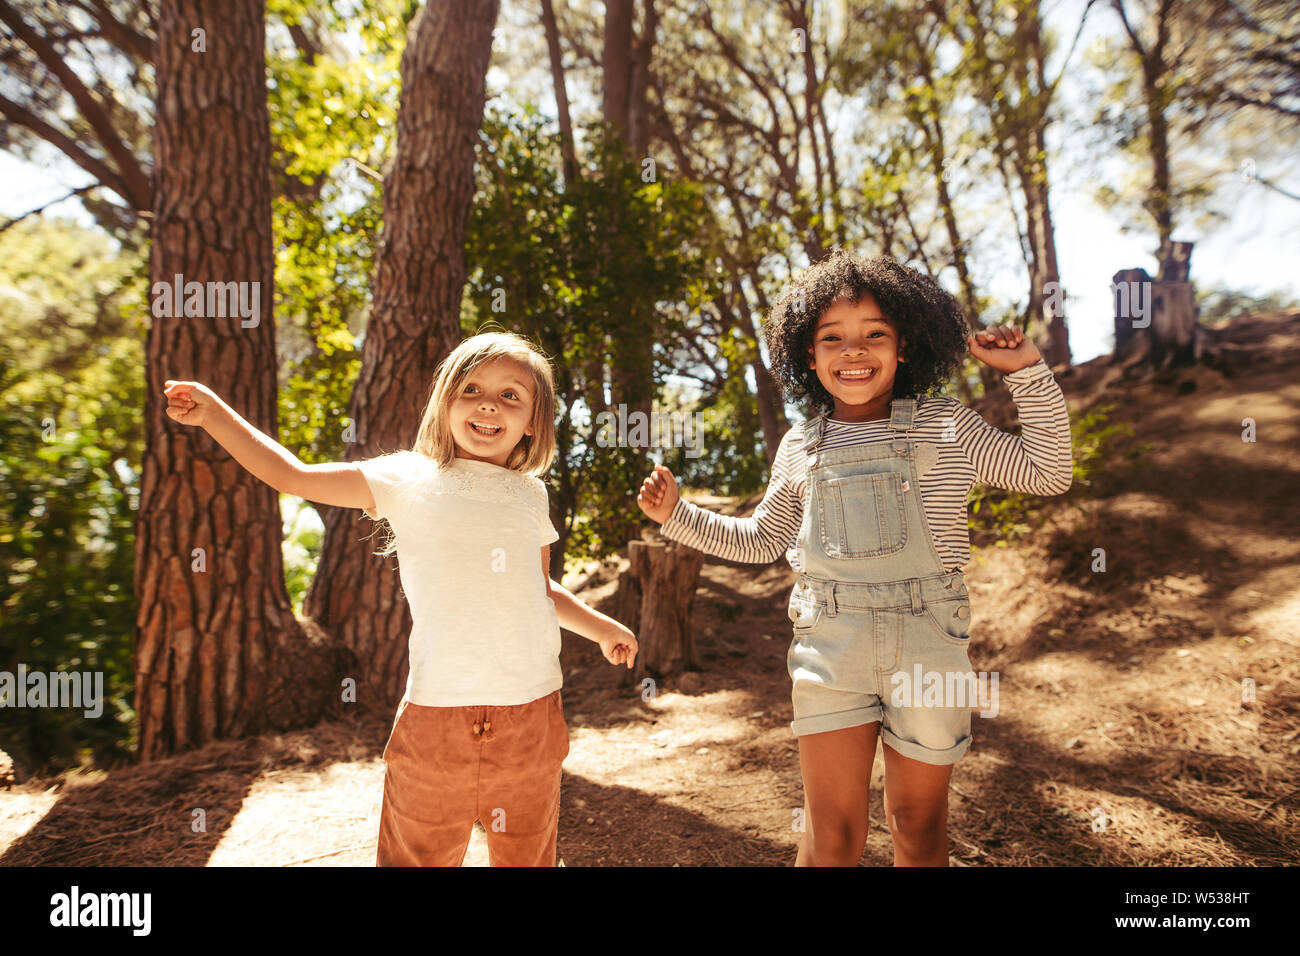 Cute girls having fun together in forest. Kids dancing in park. Stock Photo